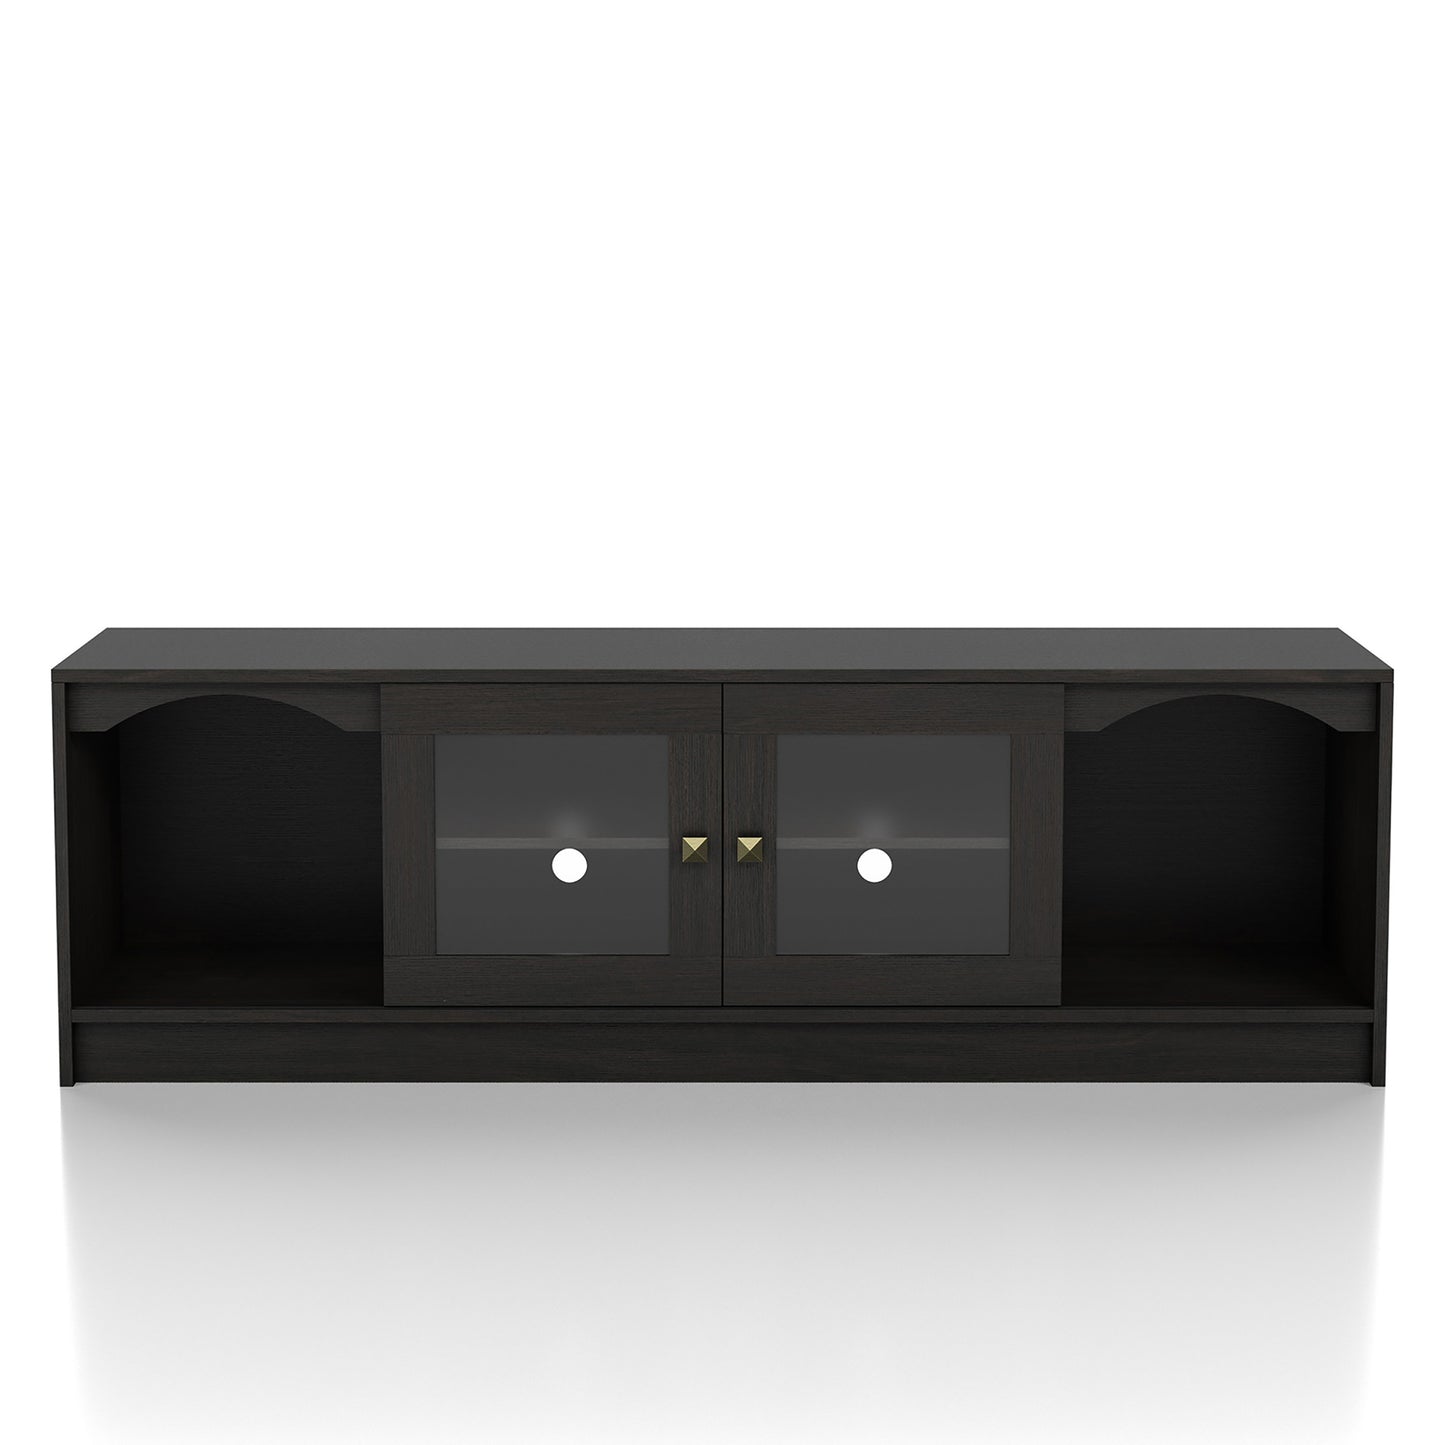 Front-facing transitional espresso two-sliding door TV stand on a white background